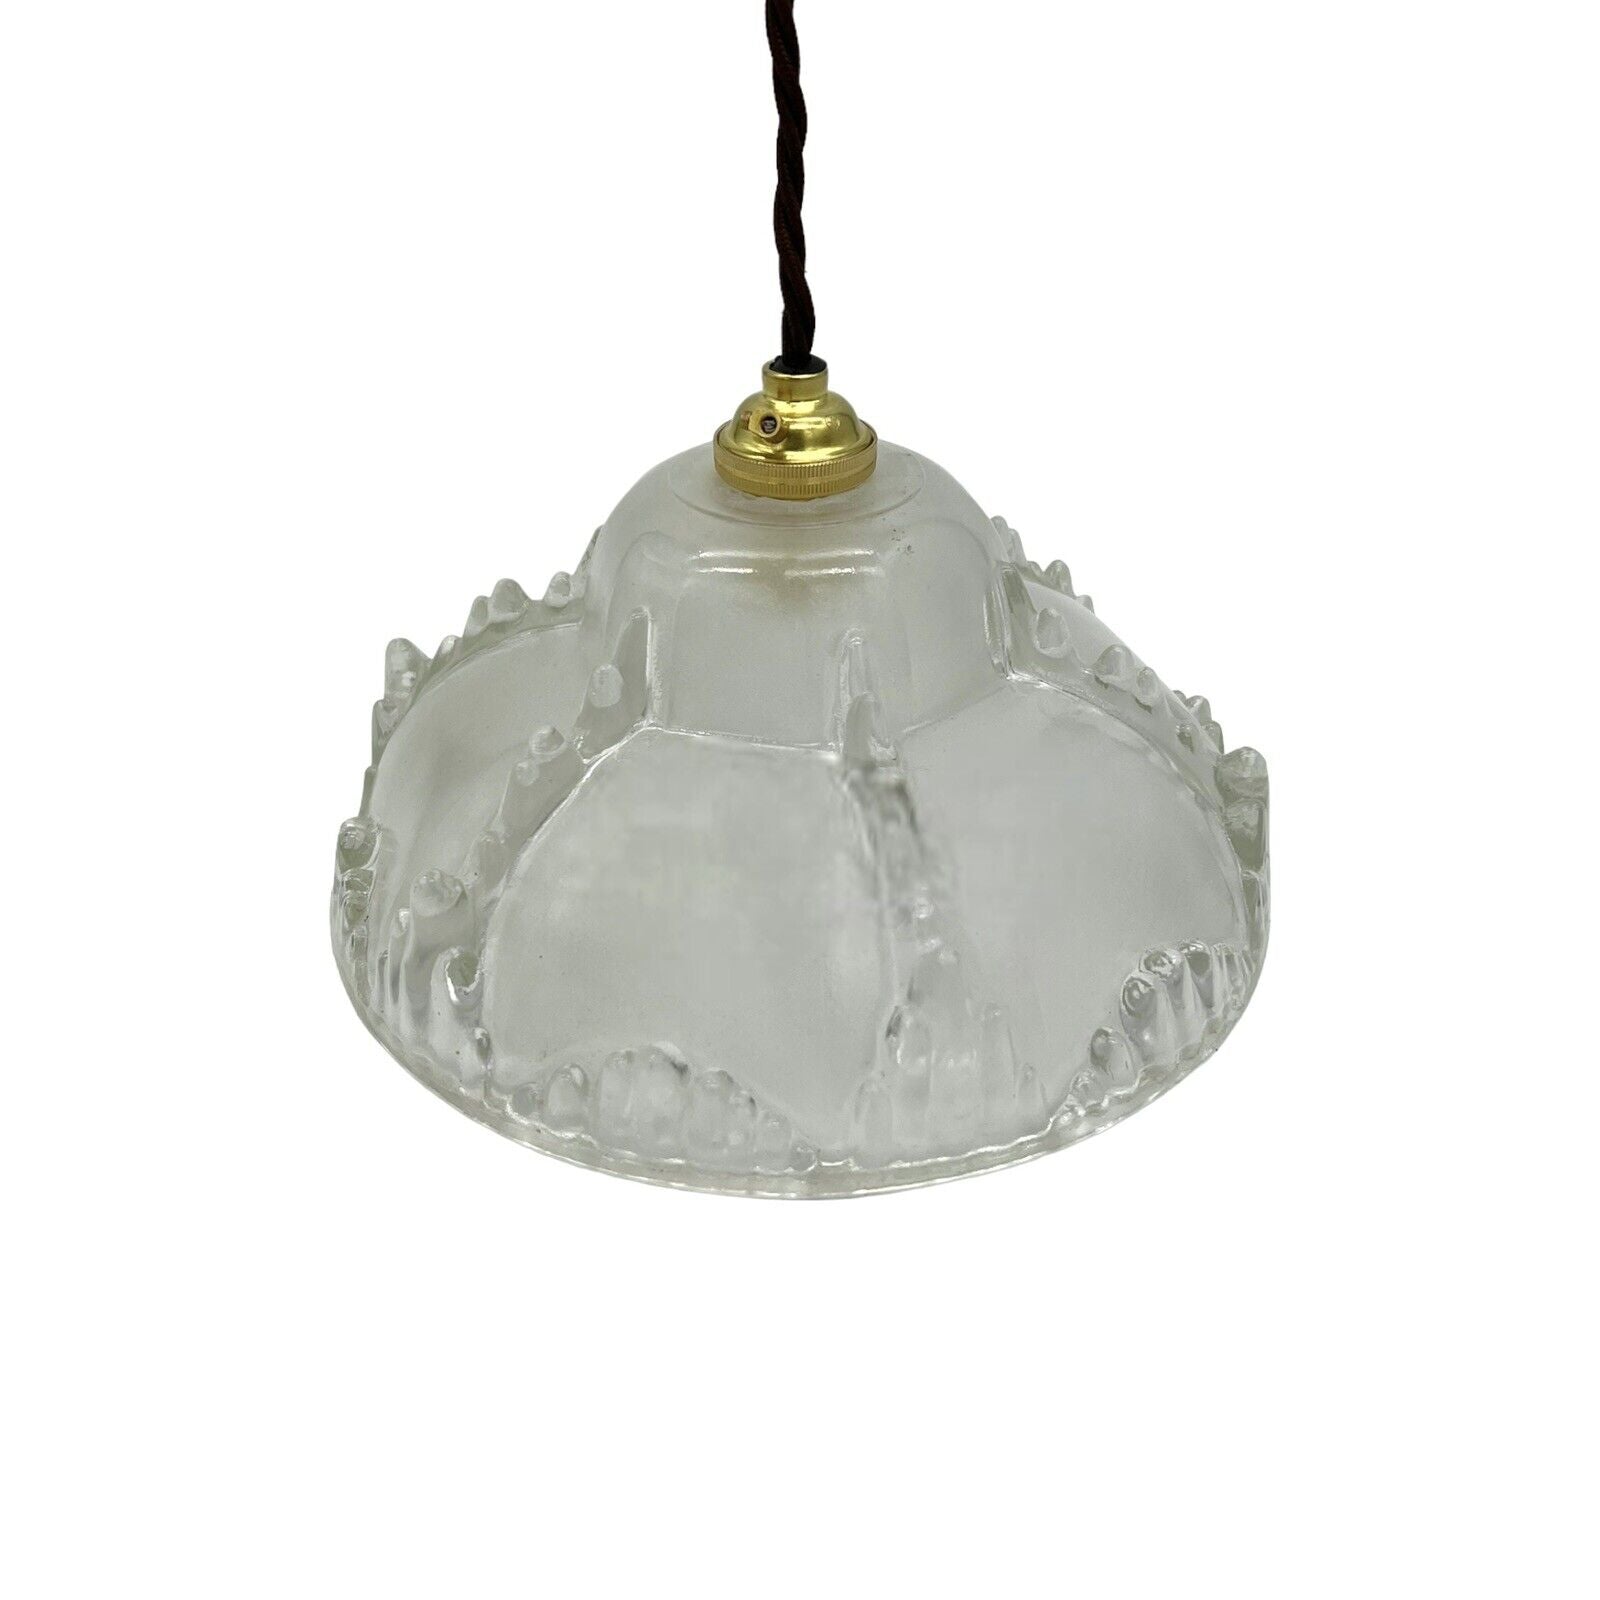 French vintage glass pendant light sold by All Things French Store